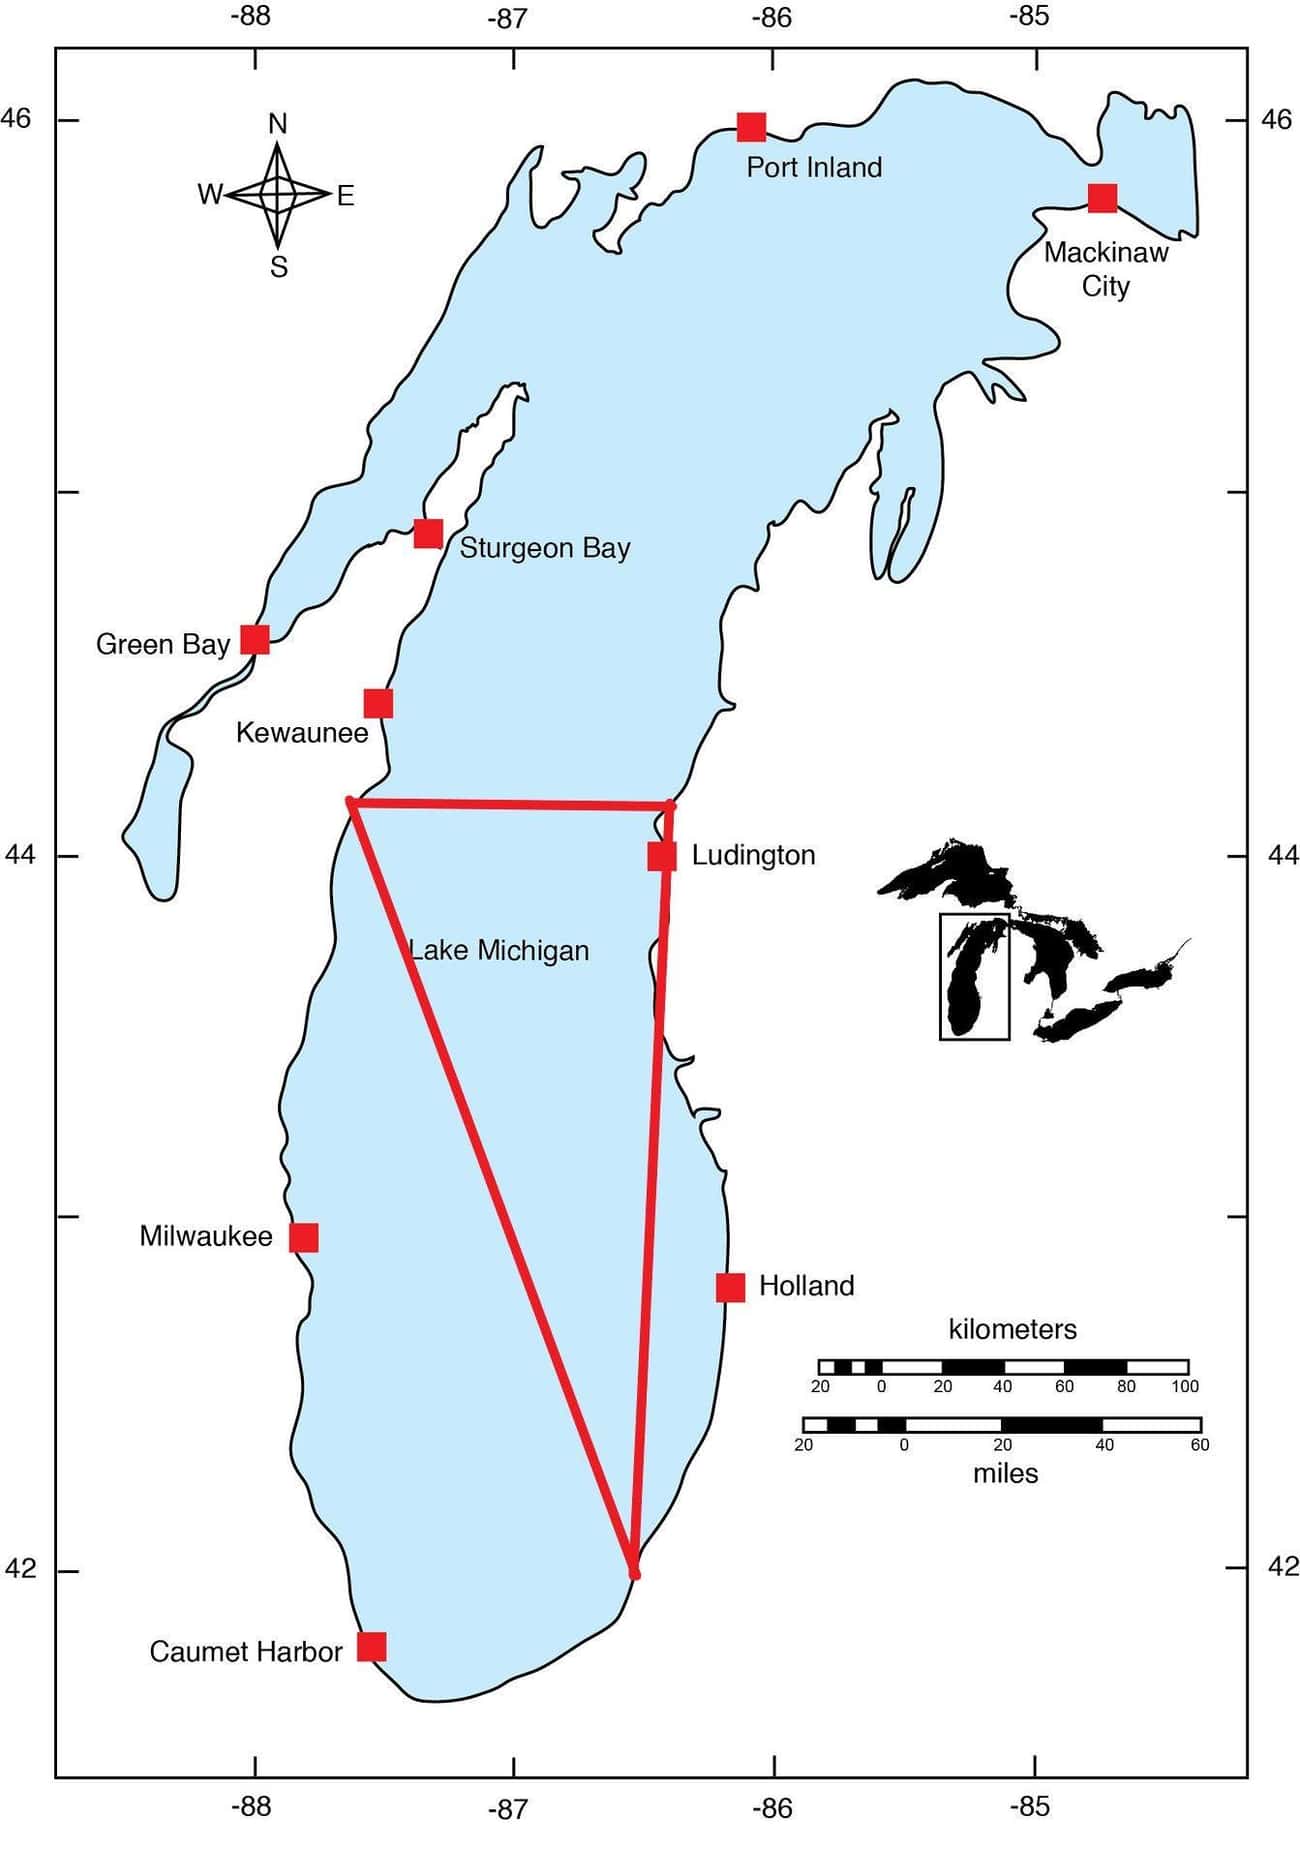 The Lake Michigan Triangle Stretches From Manitowoc, WI, East To Ludington, MI, And South To Benton Harbor, MI 